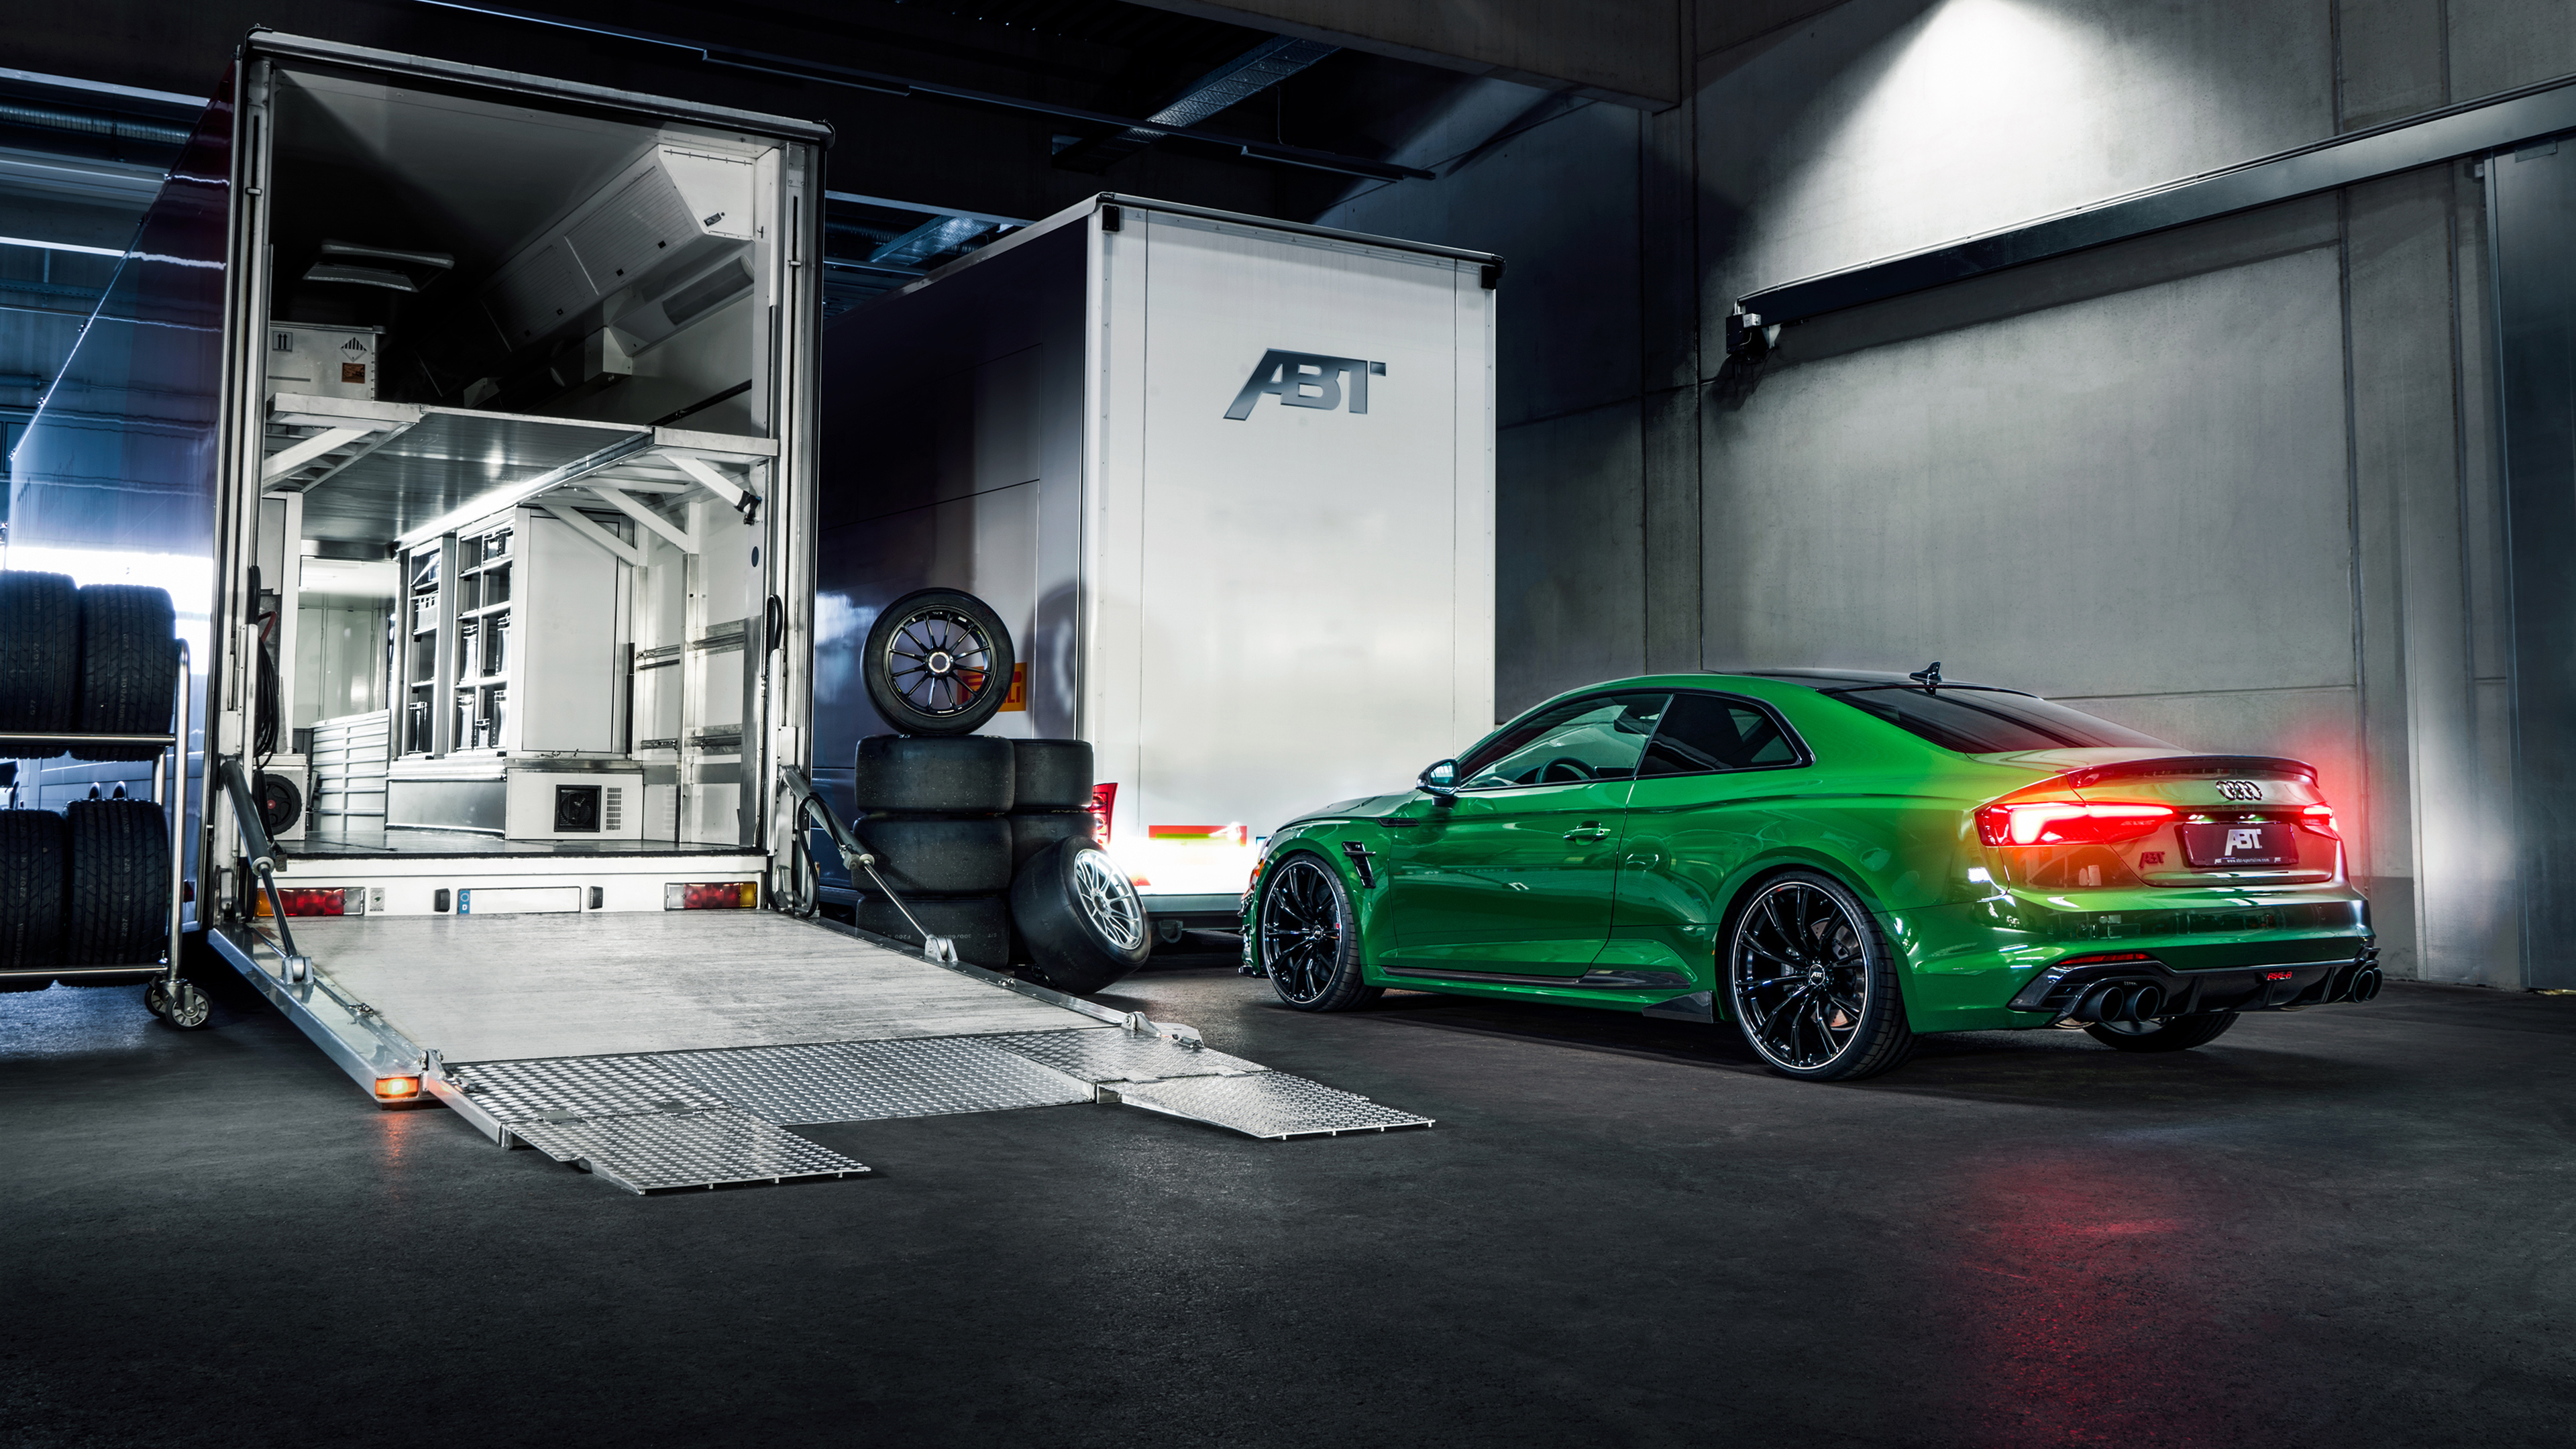 2018 Abt Audi Rs5 R Coupe Rear 4k Wallpaper Hd Car Wallpapers Id 10267